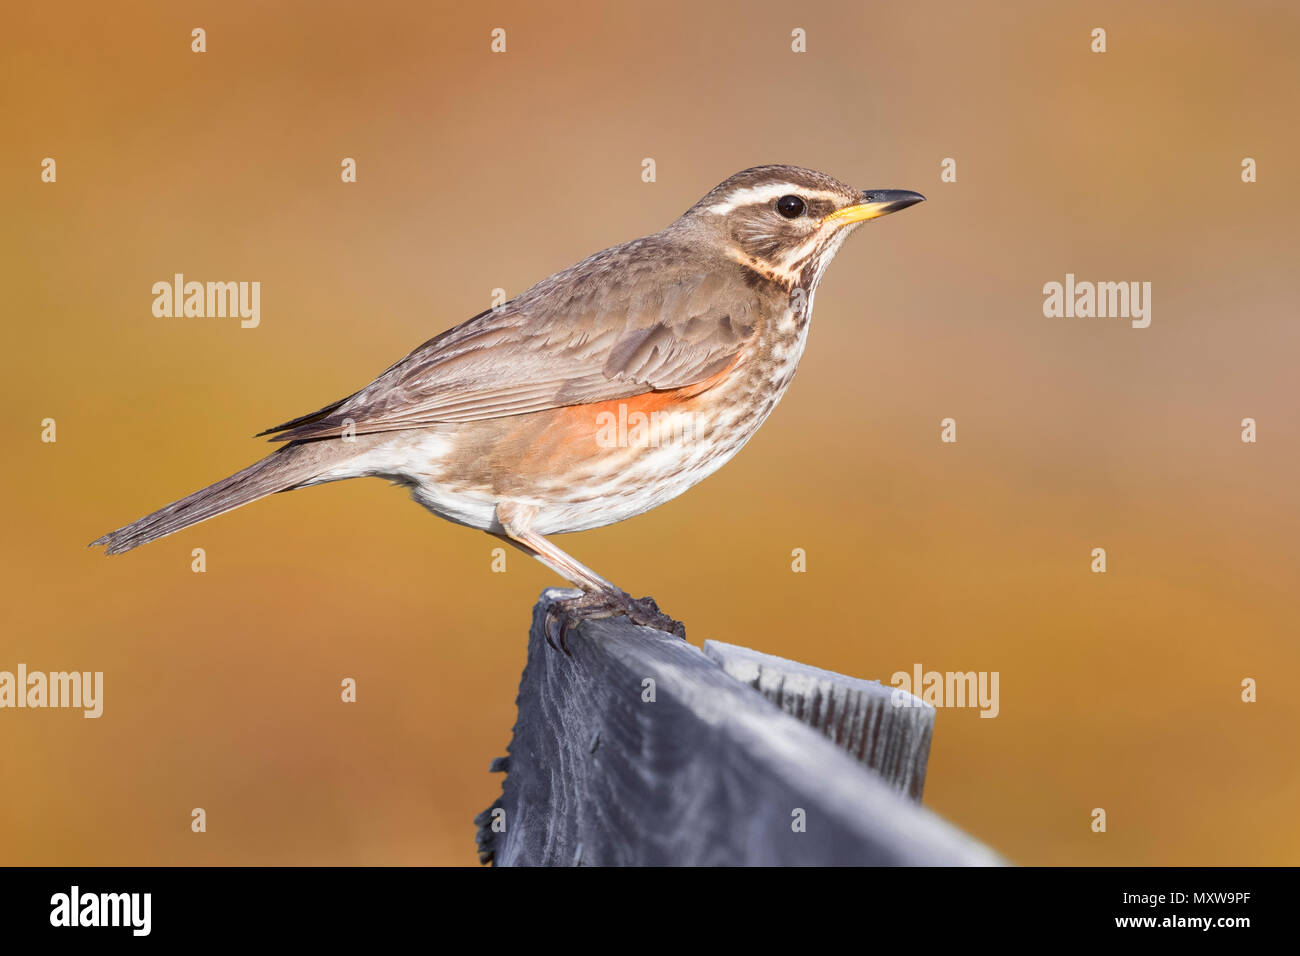 Redwing (Turdus iliacus coburni), adult perched on a piece of wood with golden background Stock Photo